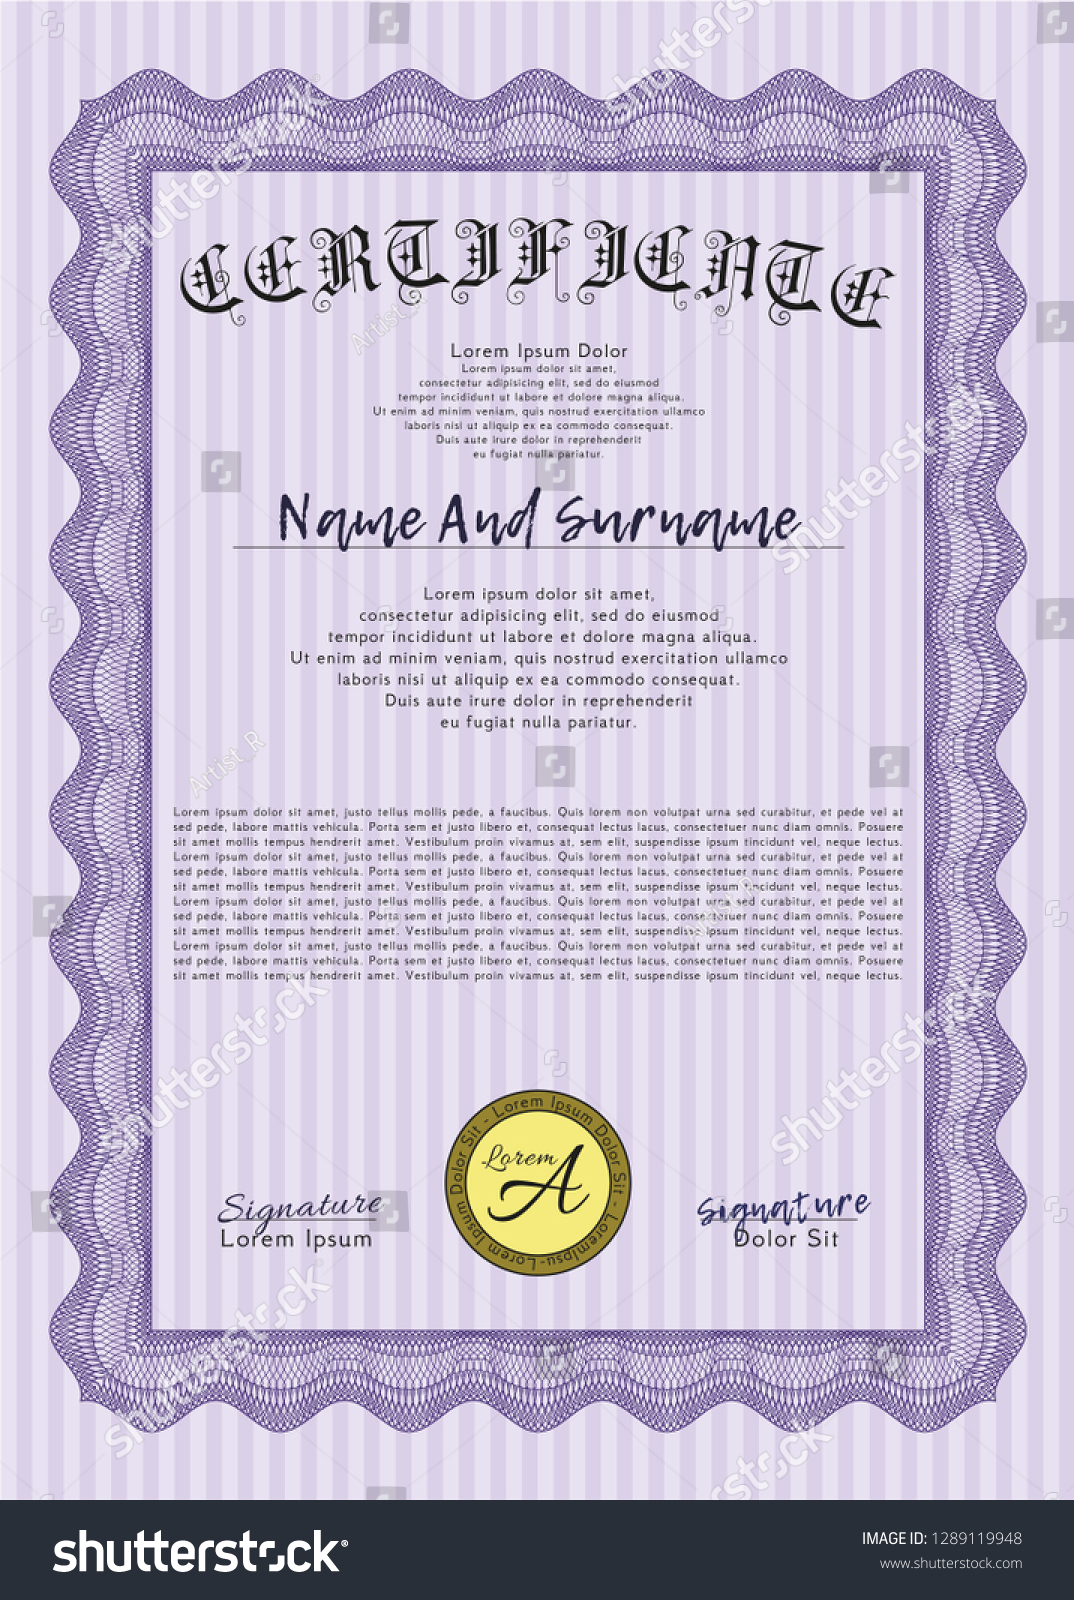 Violet Sample Certificate. Easy to print. - Royalty Free Stock Vector ...